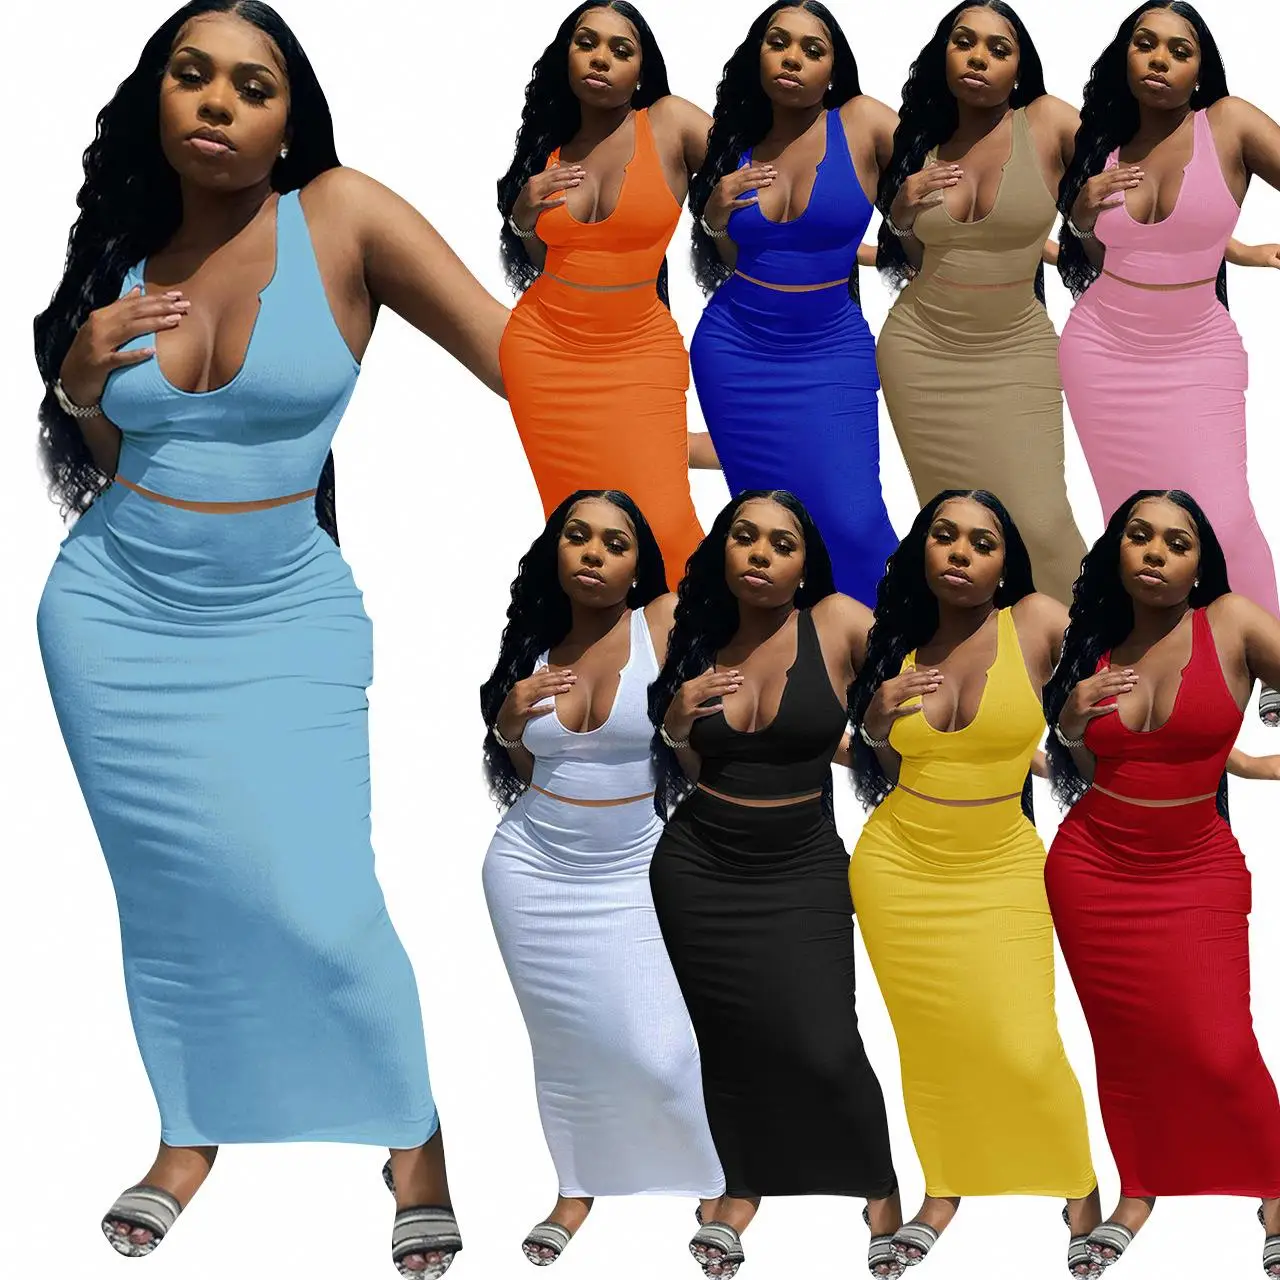 

Wholesale rib knit Skirt Set Ladies 2PC Women Clothing Sexy Solid Color V Neck Ribbed Tank Top Bodycon Tight Two Piece Skirt Set, 9 colors